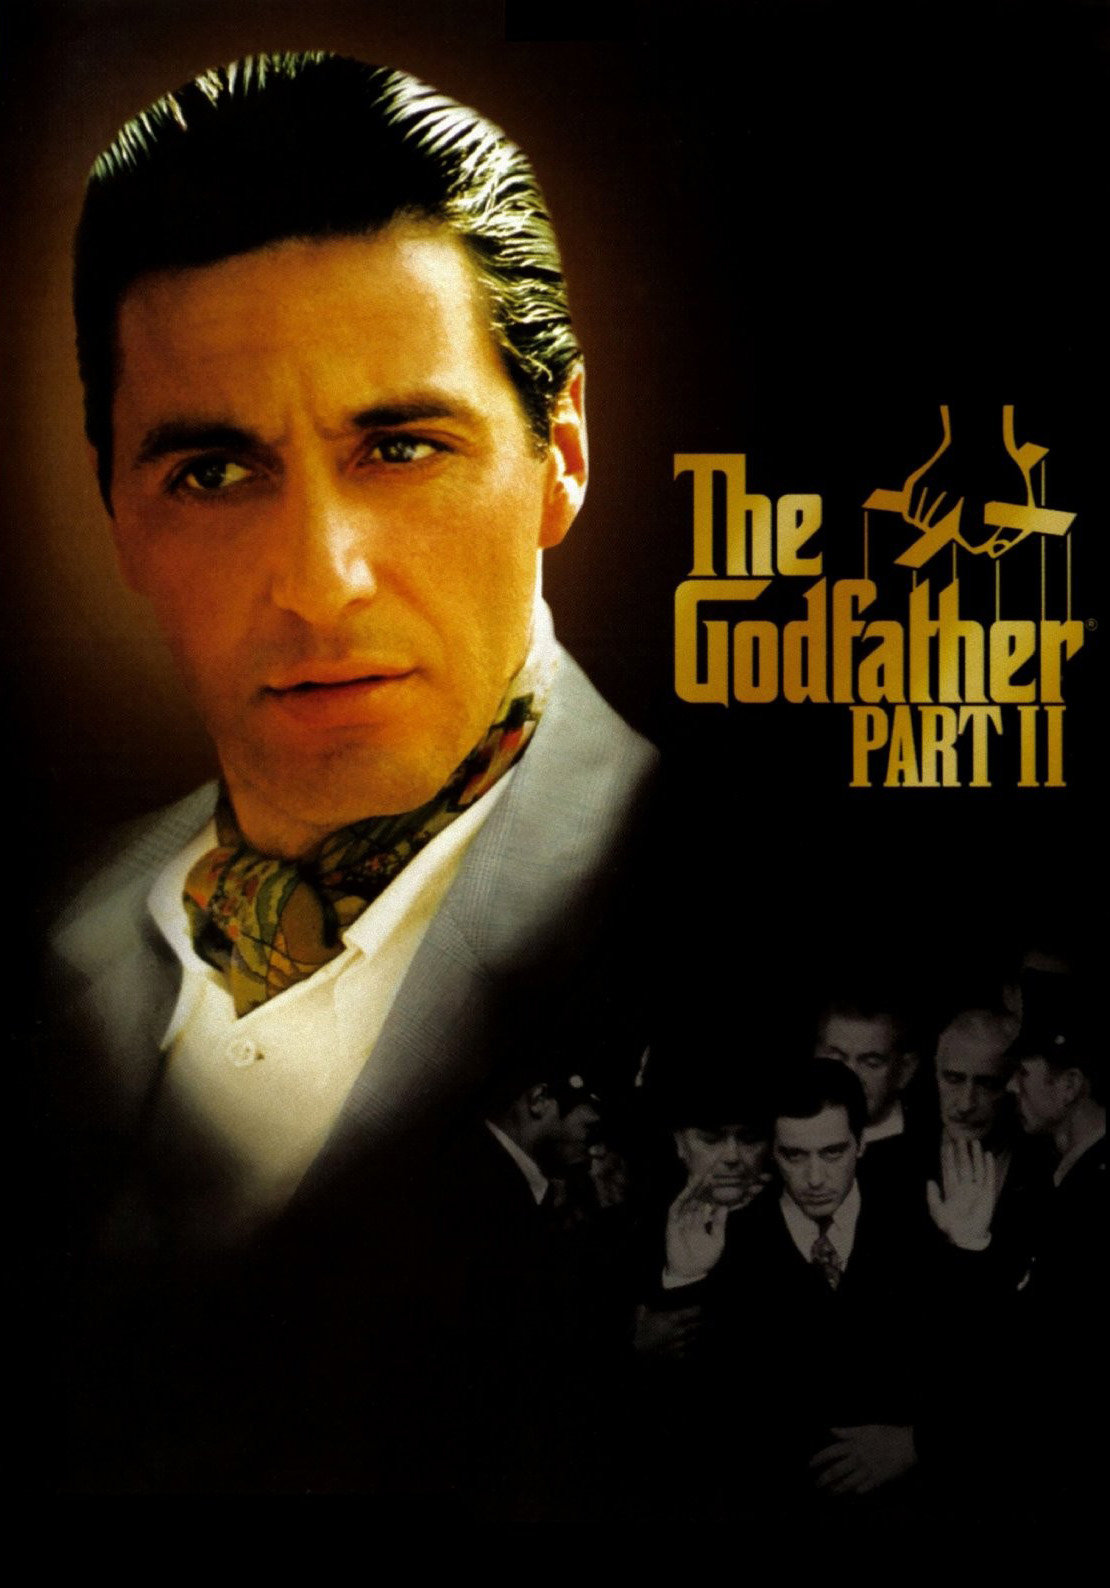 The Godfather Part II 1974